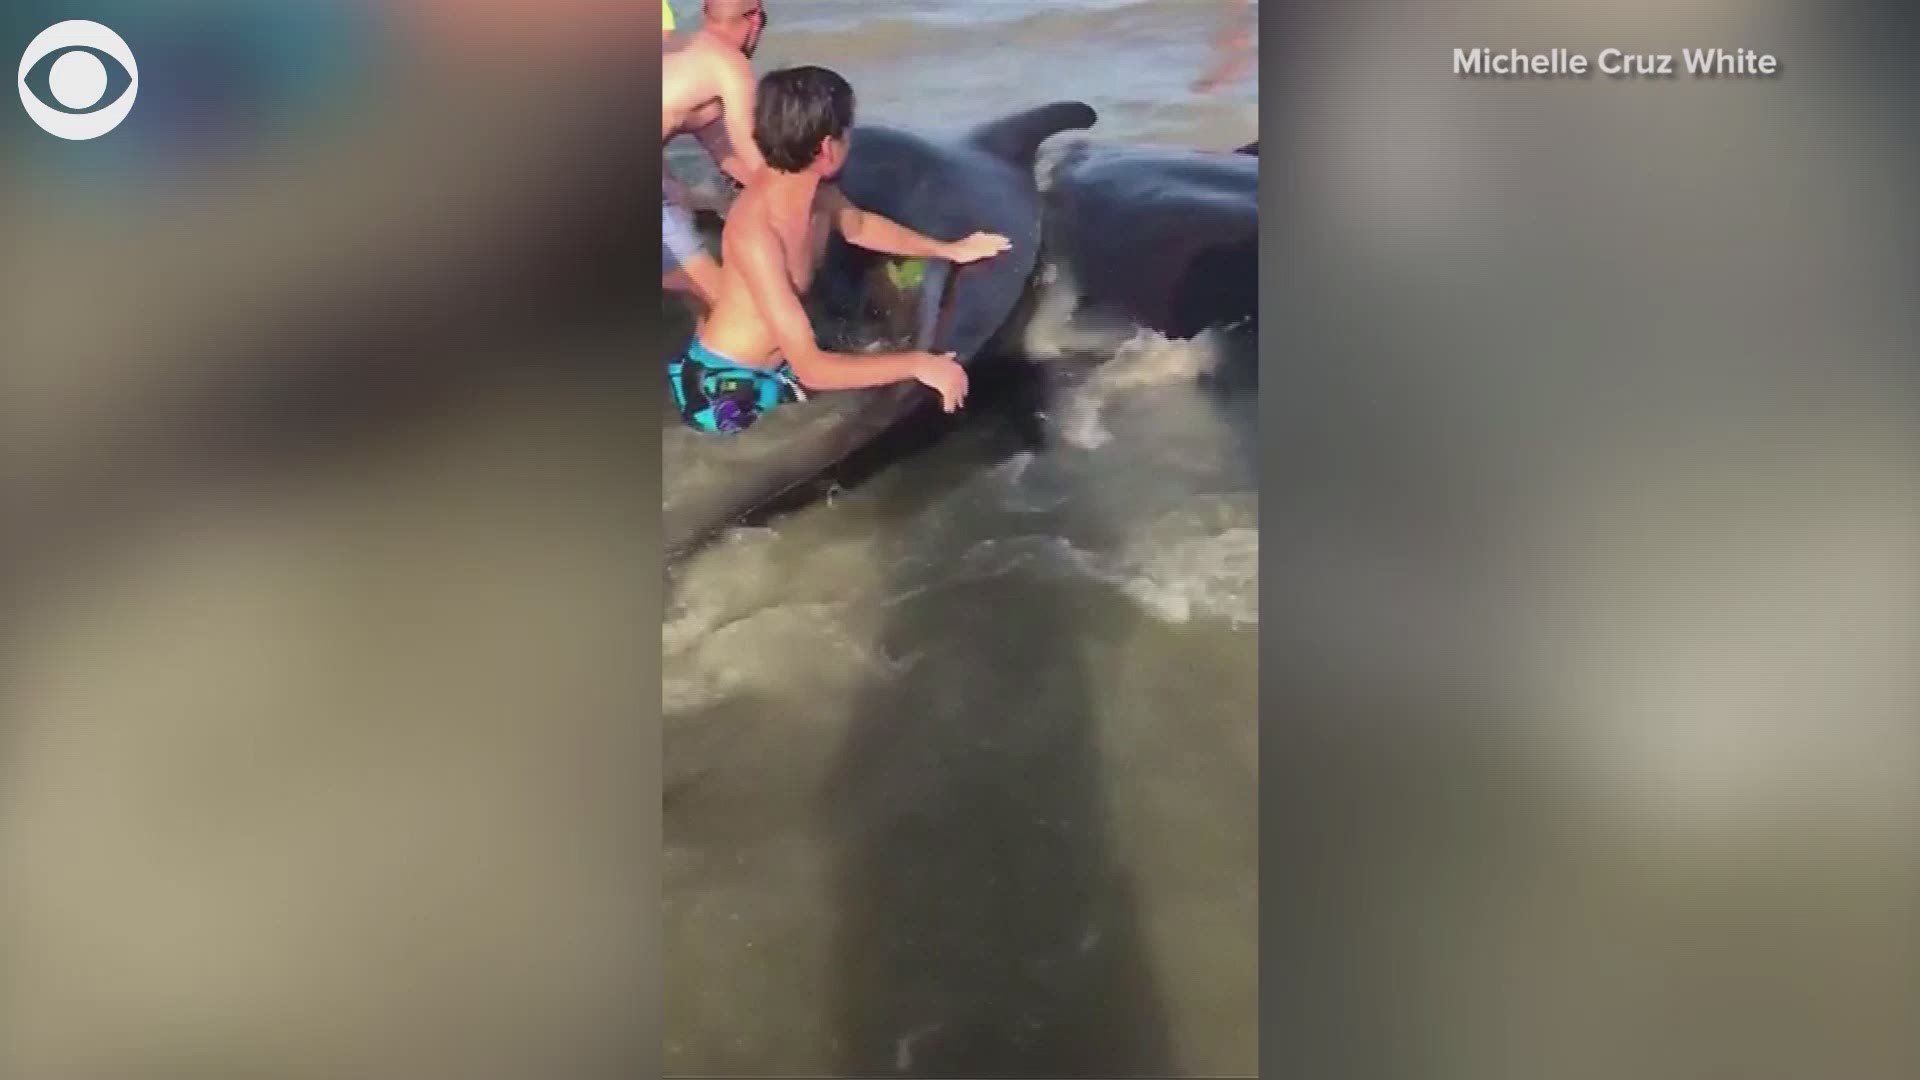 People on the beach on St. Simons Island, Georgia, helped these pilot whales back into the water on Tuesday. The Georgia Department of Natural Resources said the whales repeatedly tried to beach themselves. The pod of whales was last seen offshore Wednesday.